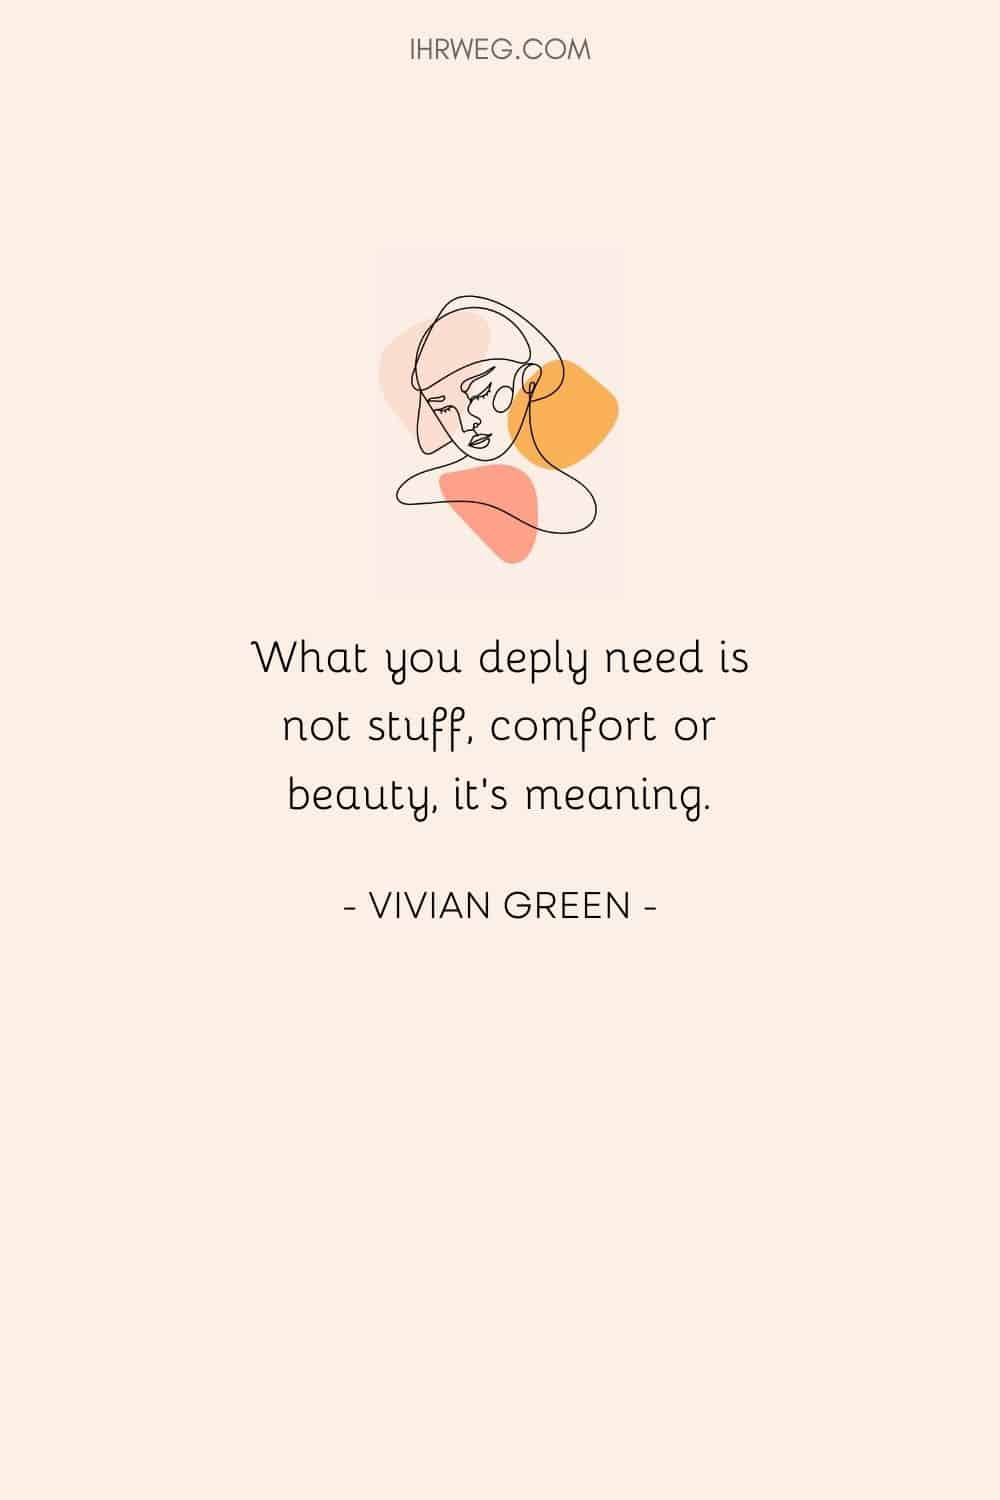 What you deeply need is meaning